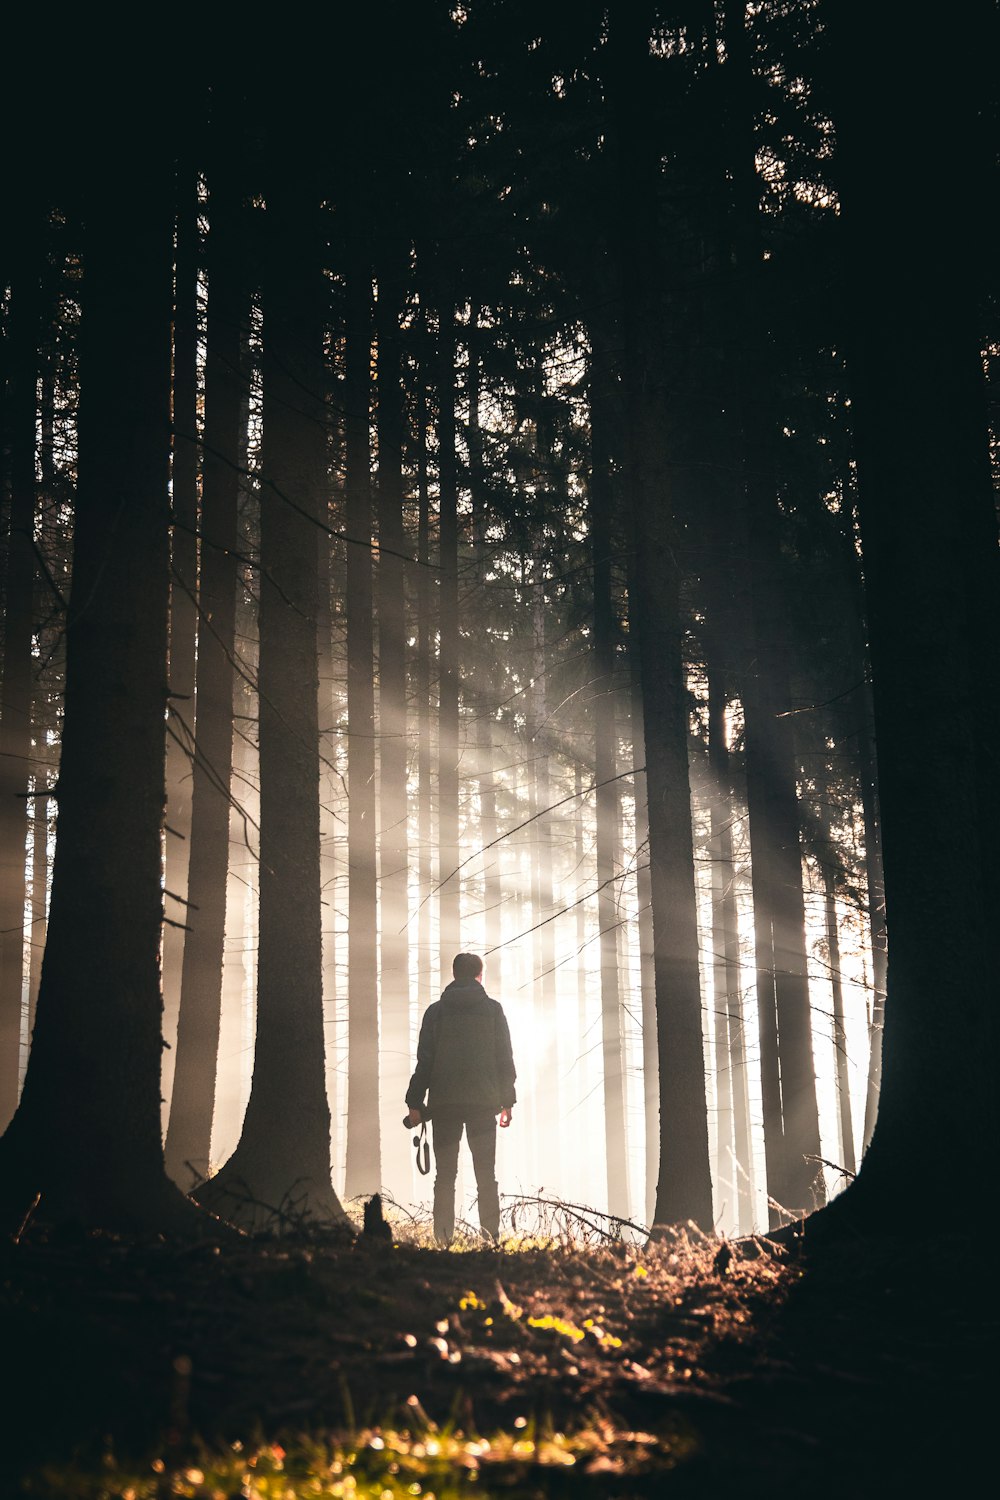 man in black jacket standing in forest